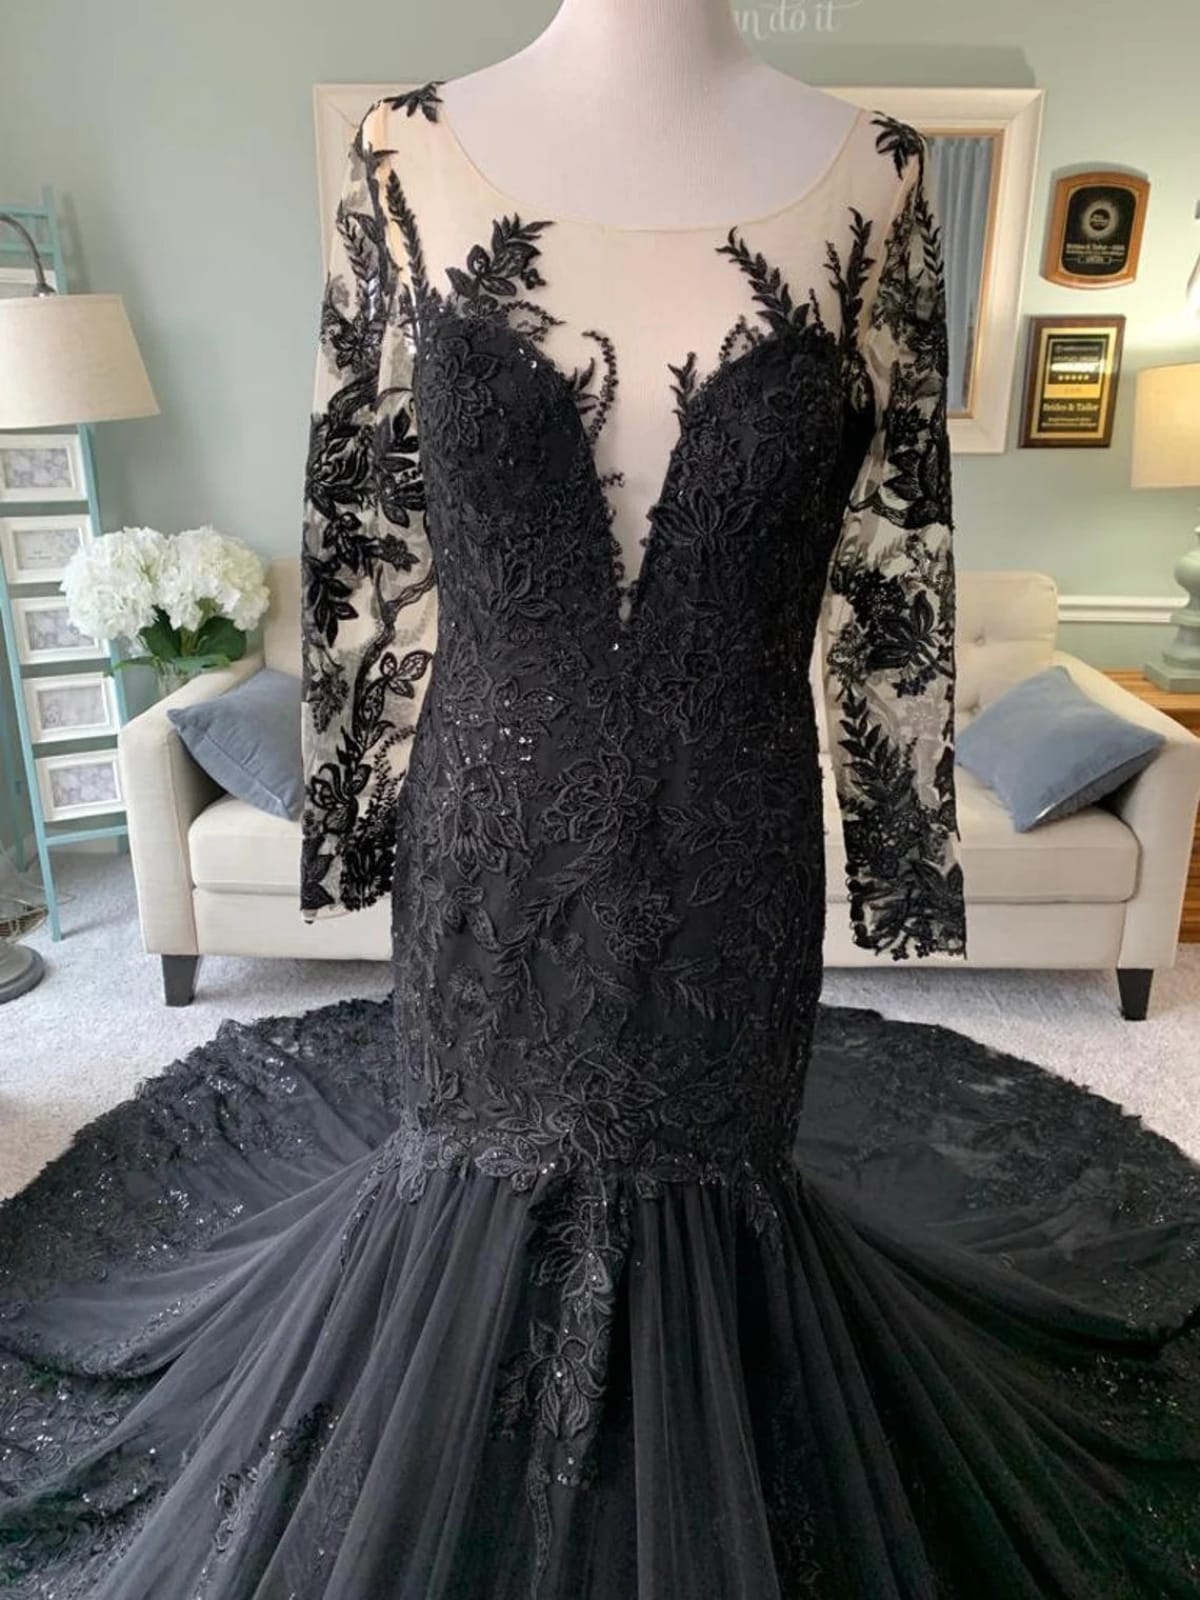 Illusion Long Sleeve Lace Tulle Trumpet Black Wedding Dress, Sequins